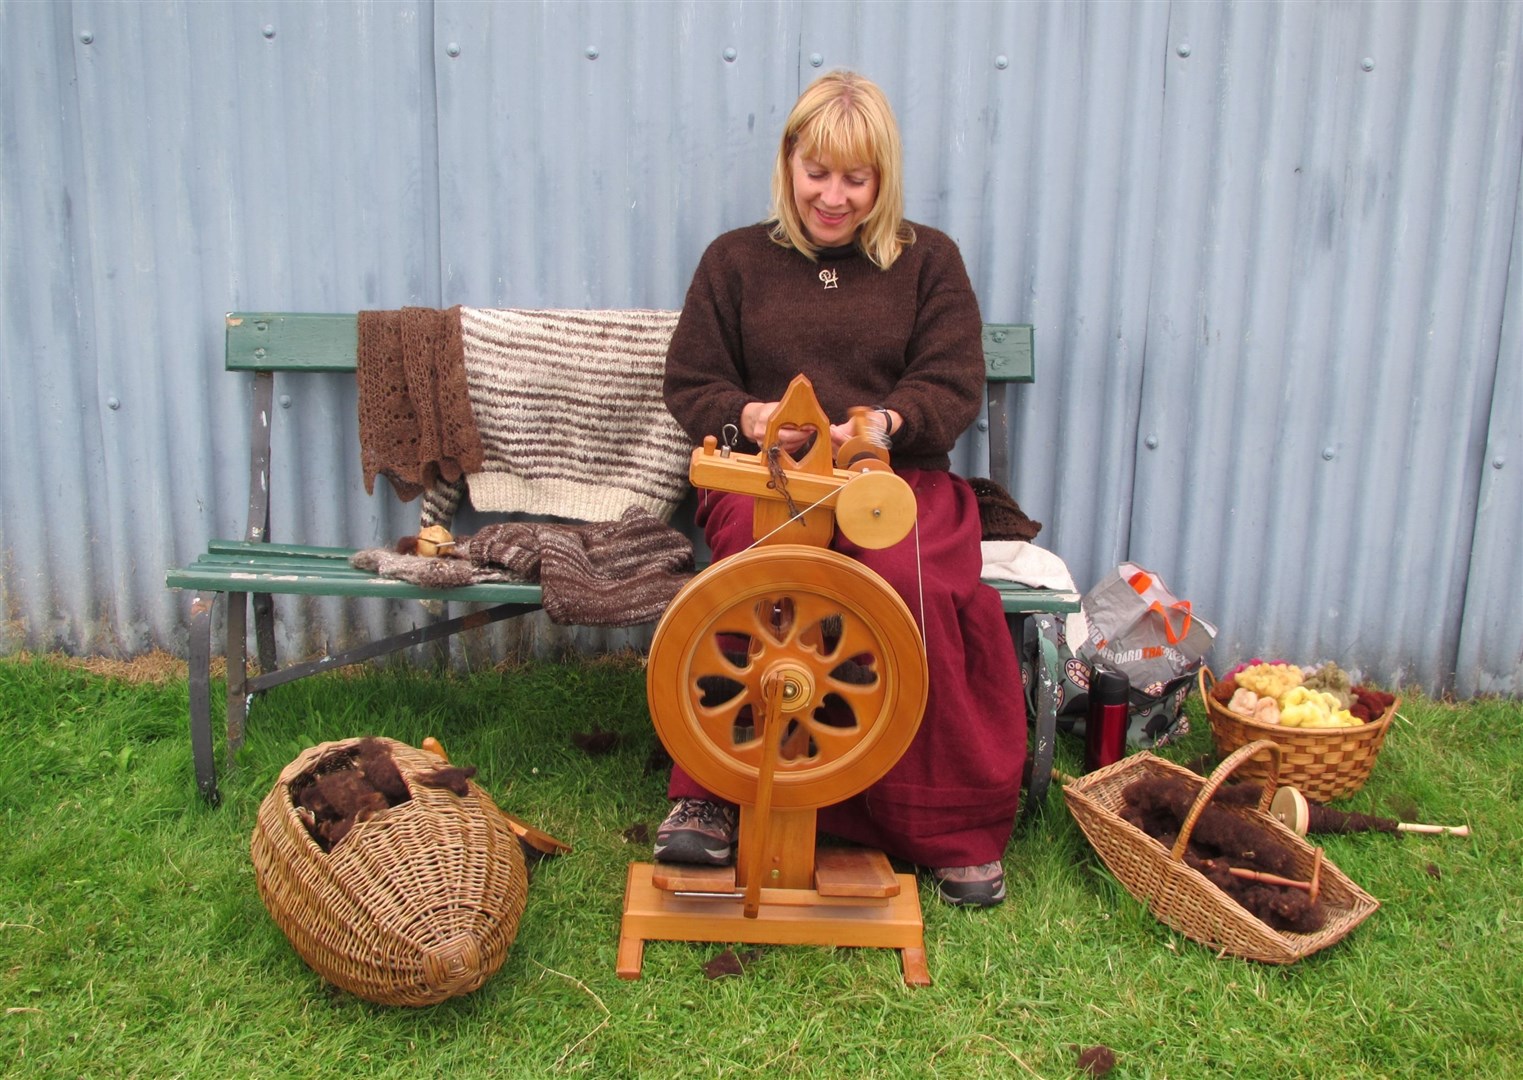 Learn how to spin wool at the Highland Folk Museum this weekend. It will be just one of the many wool related activities on show and to try your hand at.